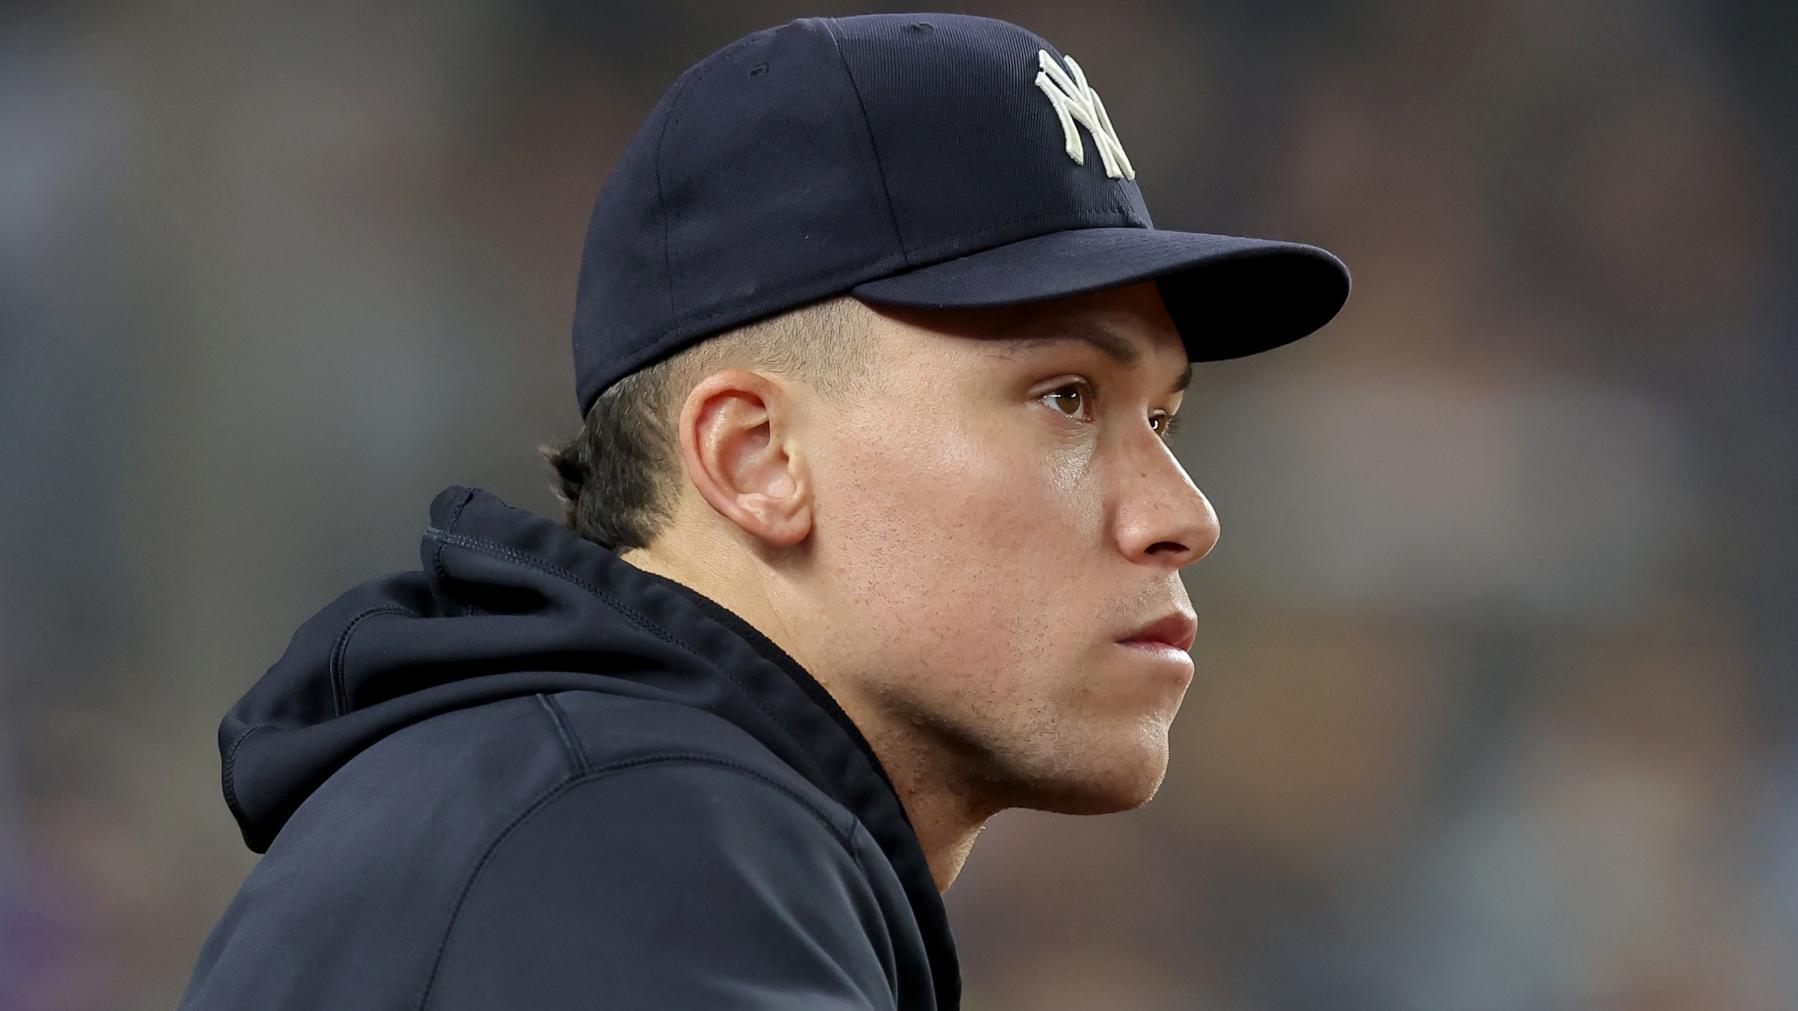 Yankees activate Aaron Judge after 10-game IL stint - ABC7 New York